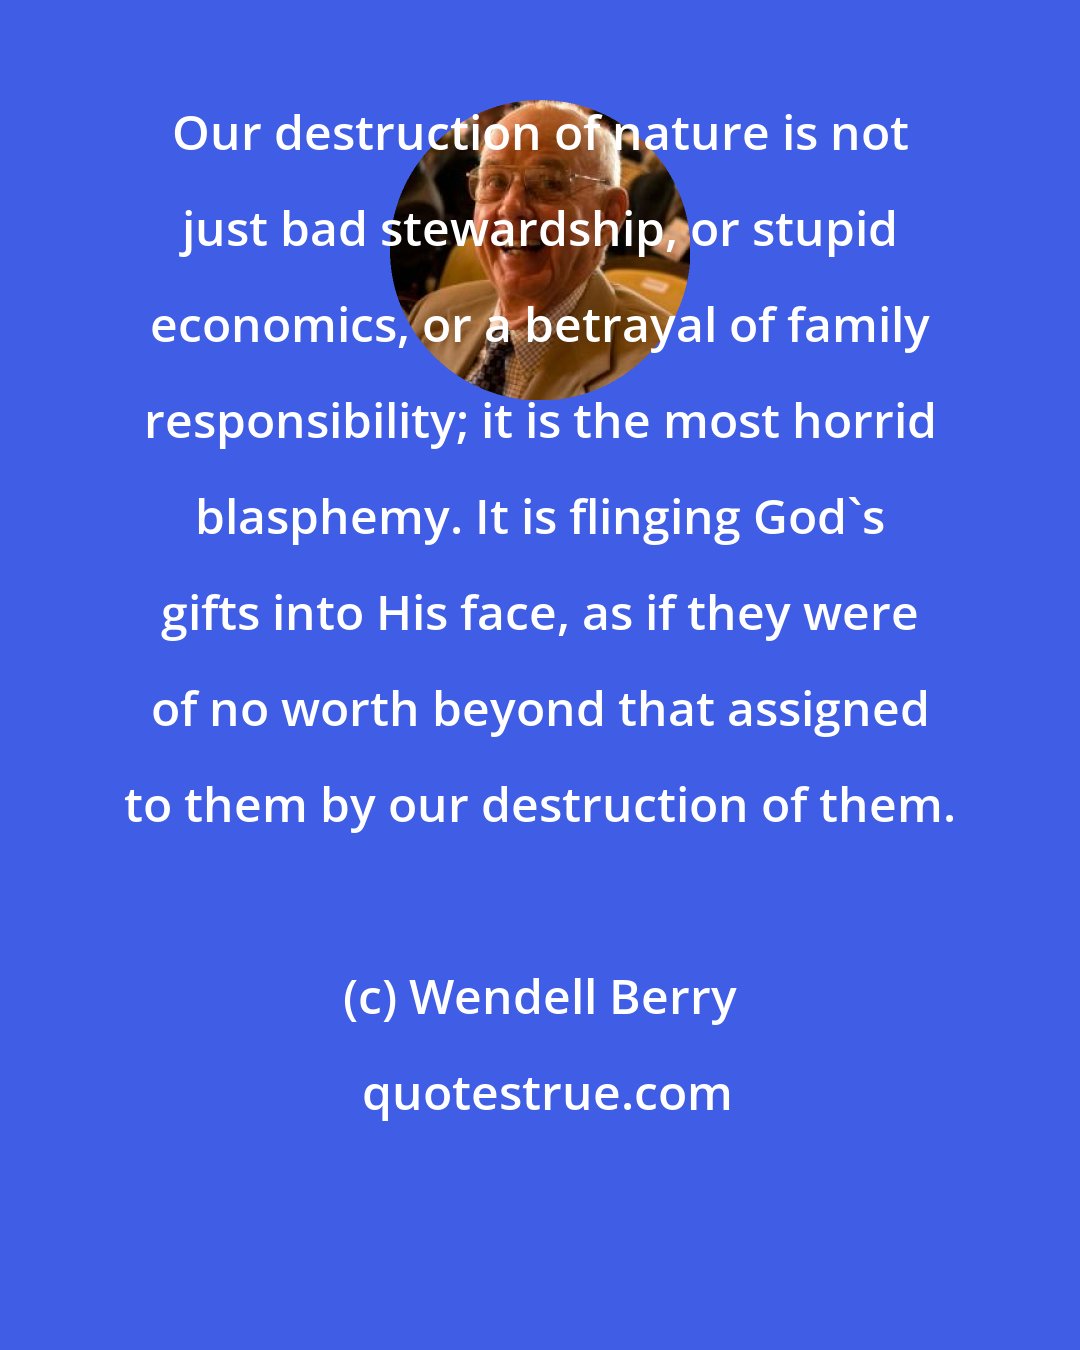 Wendell Berry: Our destruction of nature is not just bad stewardship, or stupid economics, or a betrayal of family responsibility; it is the most horrid blasphemy. It is flinging God's gifts into His face, as if they were of no worth beyond that assigned to them by our destruction of them.